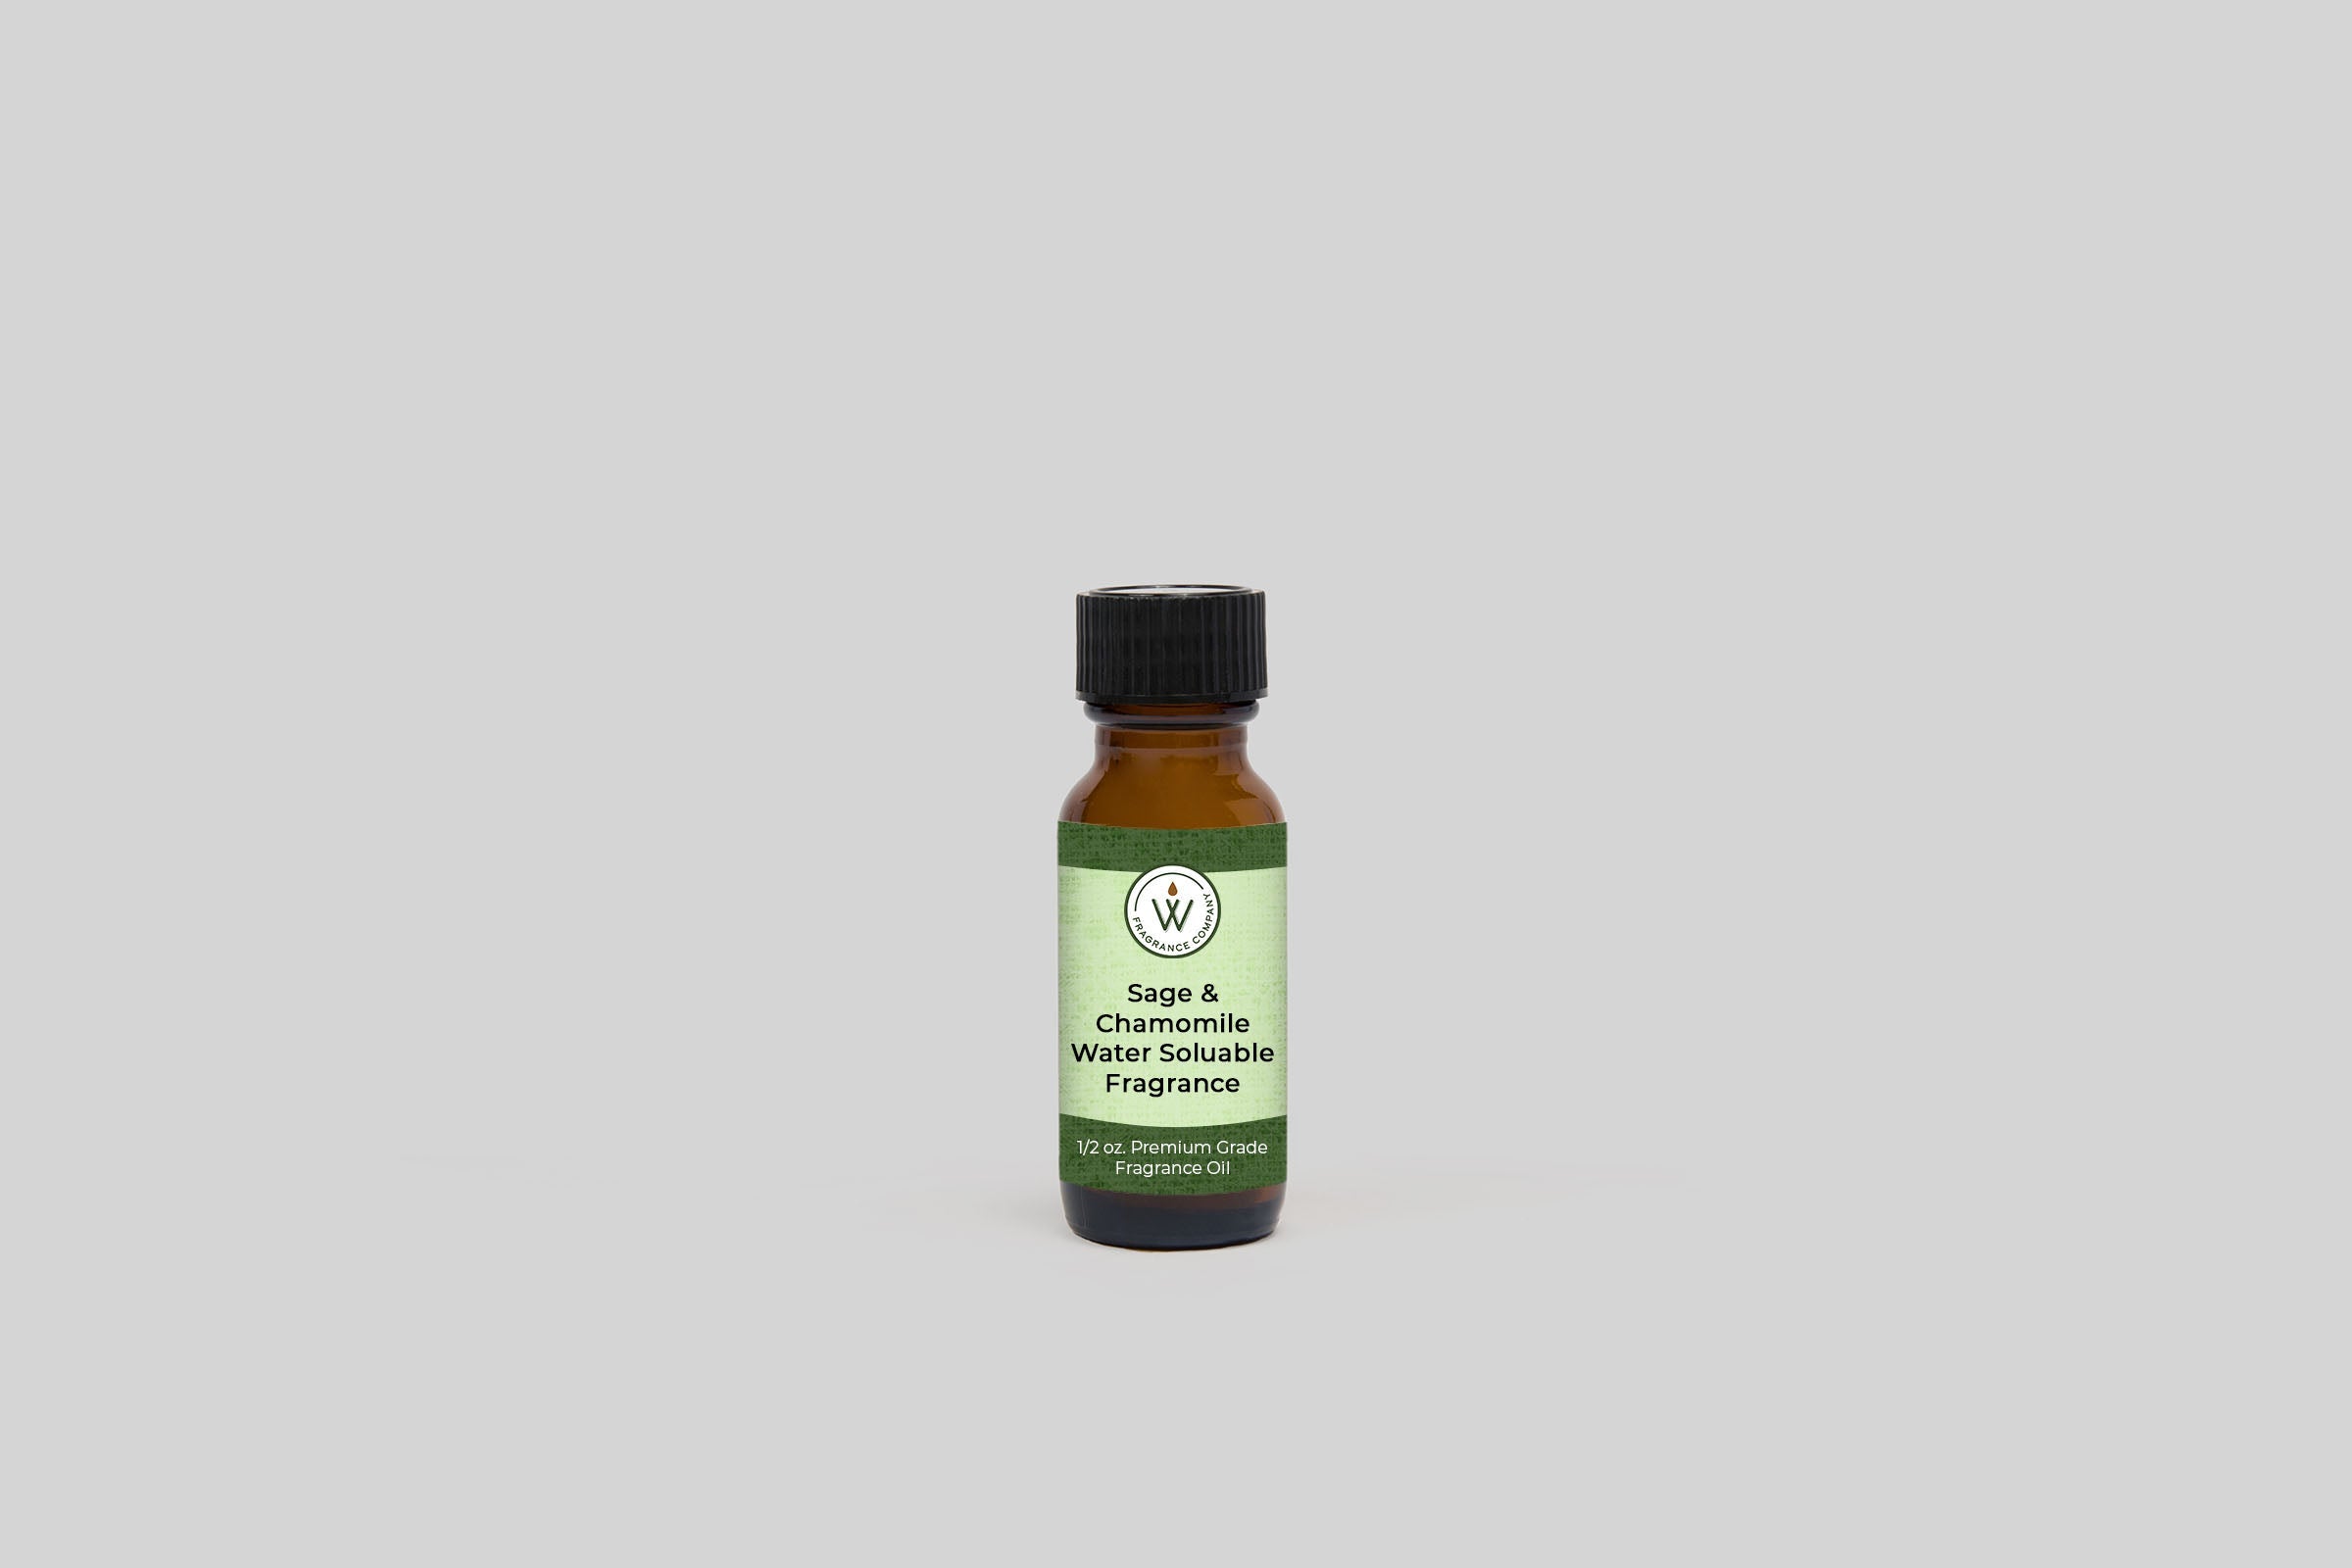 Sage & Chamomile Water Soluble Fragrance